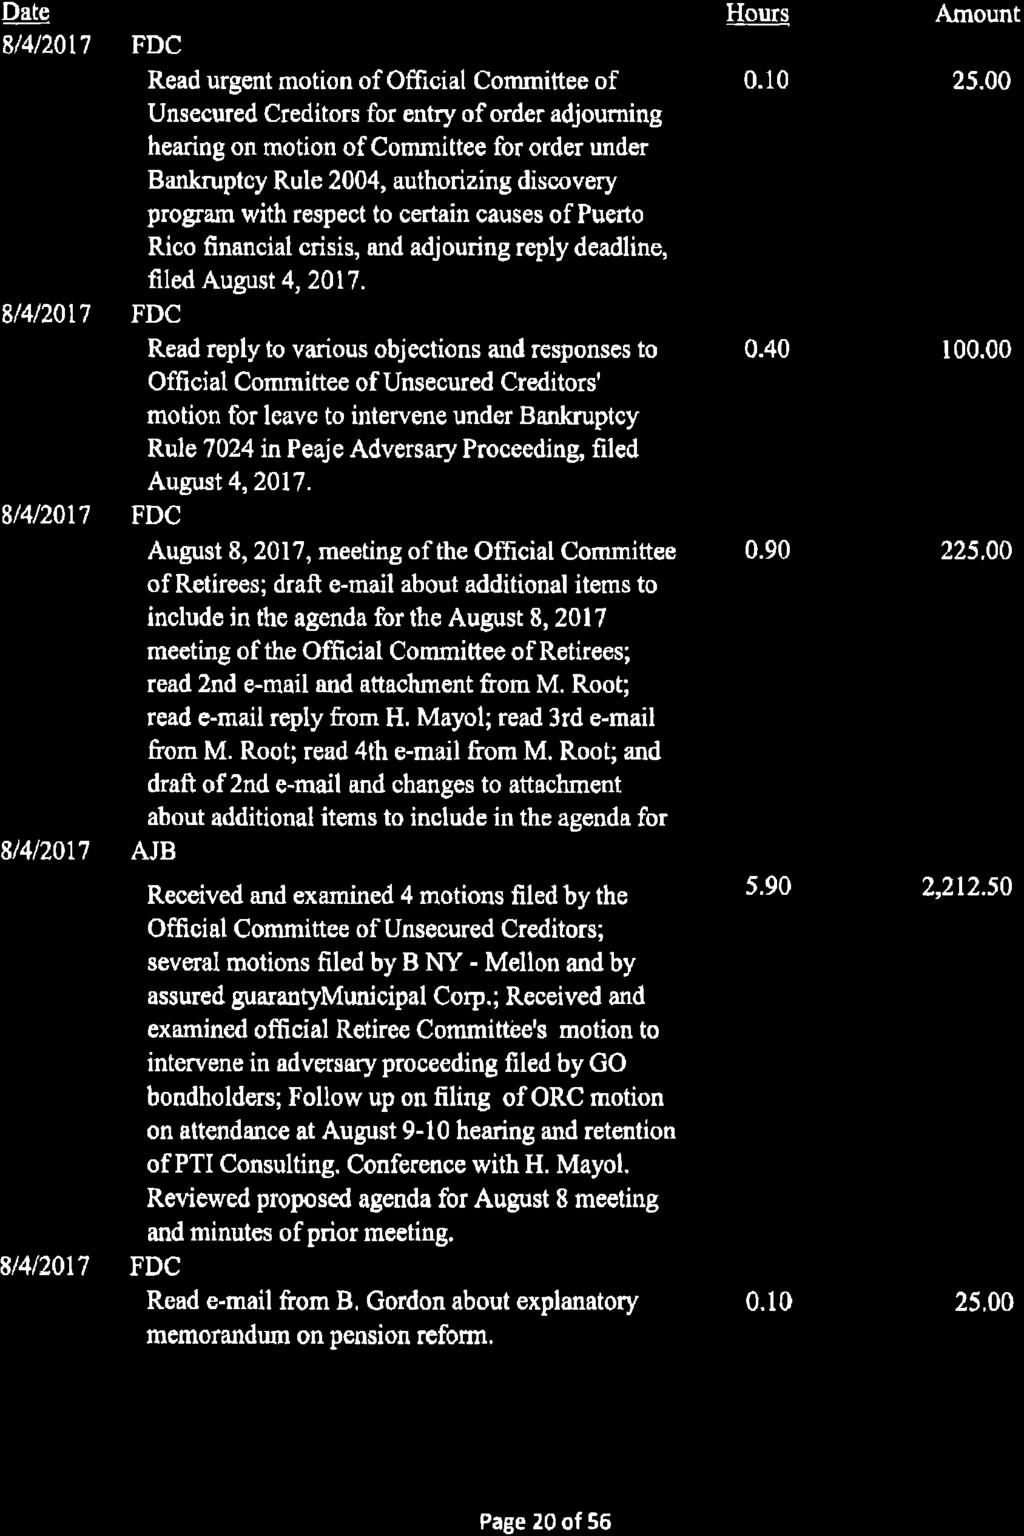 Exhibit C- Detailed Time Records Page 33 of 112 Date 8/4/2017 8/4/2017 8/4/2017 8/4/2017 8/4/2017 Attorney / Activity FDC Read urgent motion of Official Committee of Unsecured Creditors for entry of